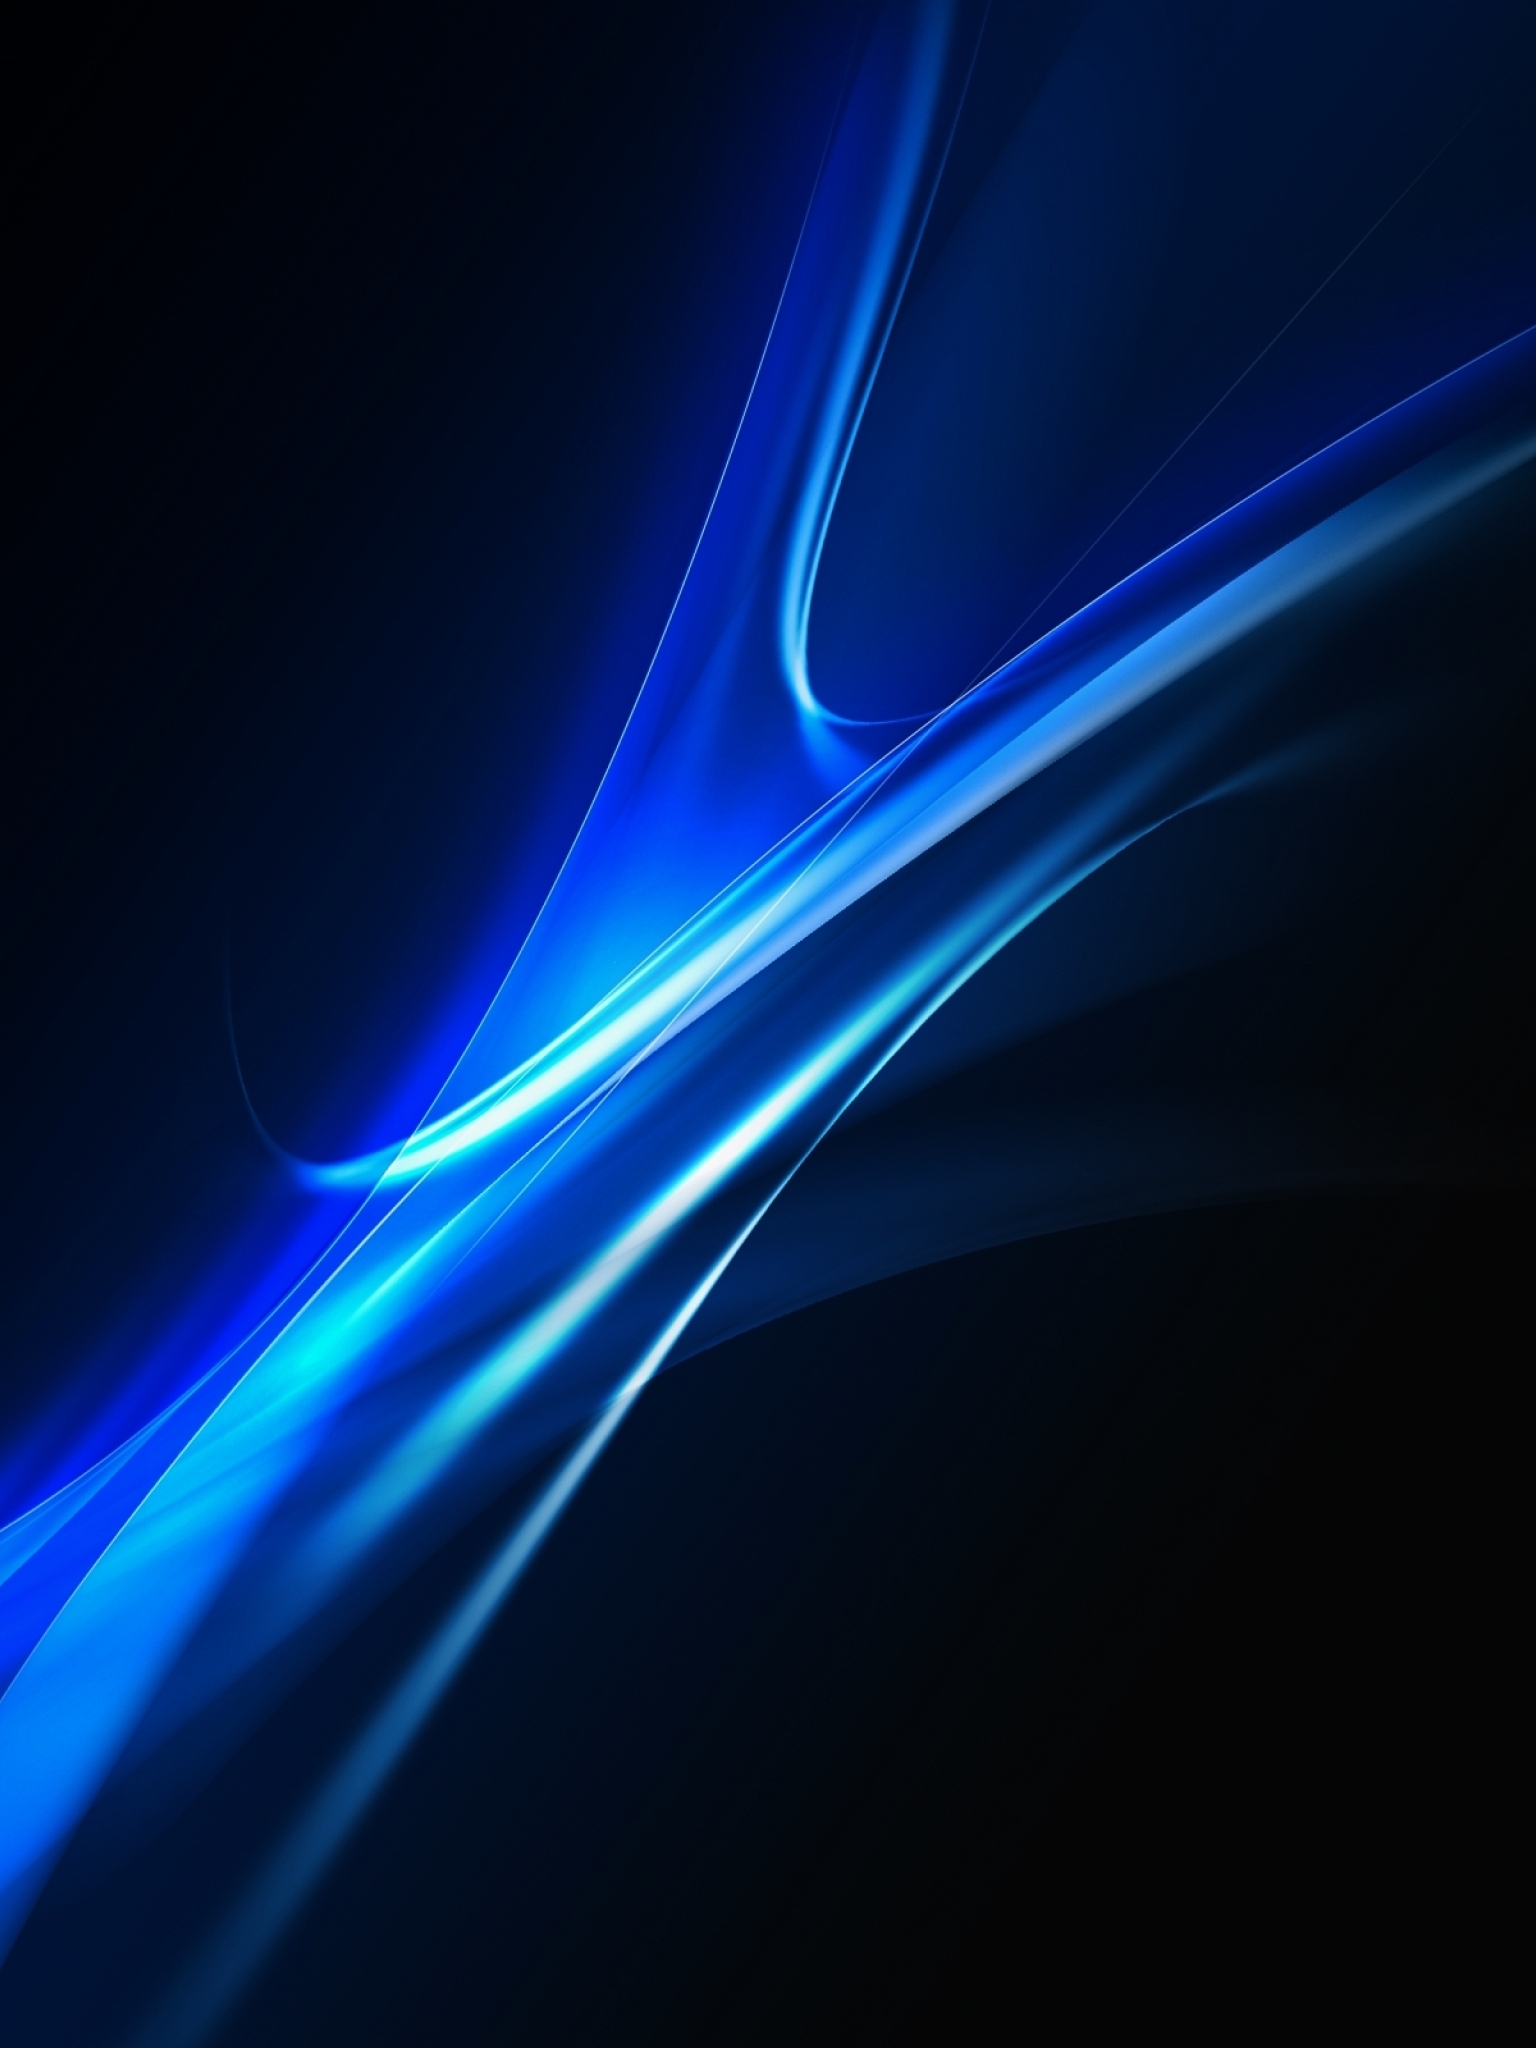 1536x48 Lines Dark White 1536x48 Resolution Wallpaper Hd Abstract 4k Wallpapers Images Photos And Background